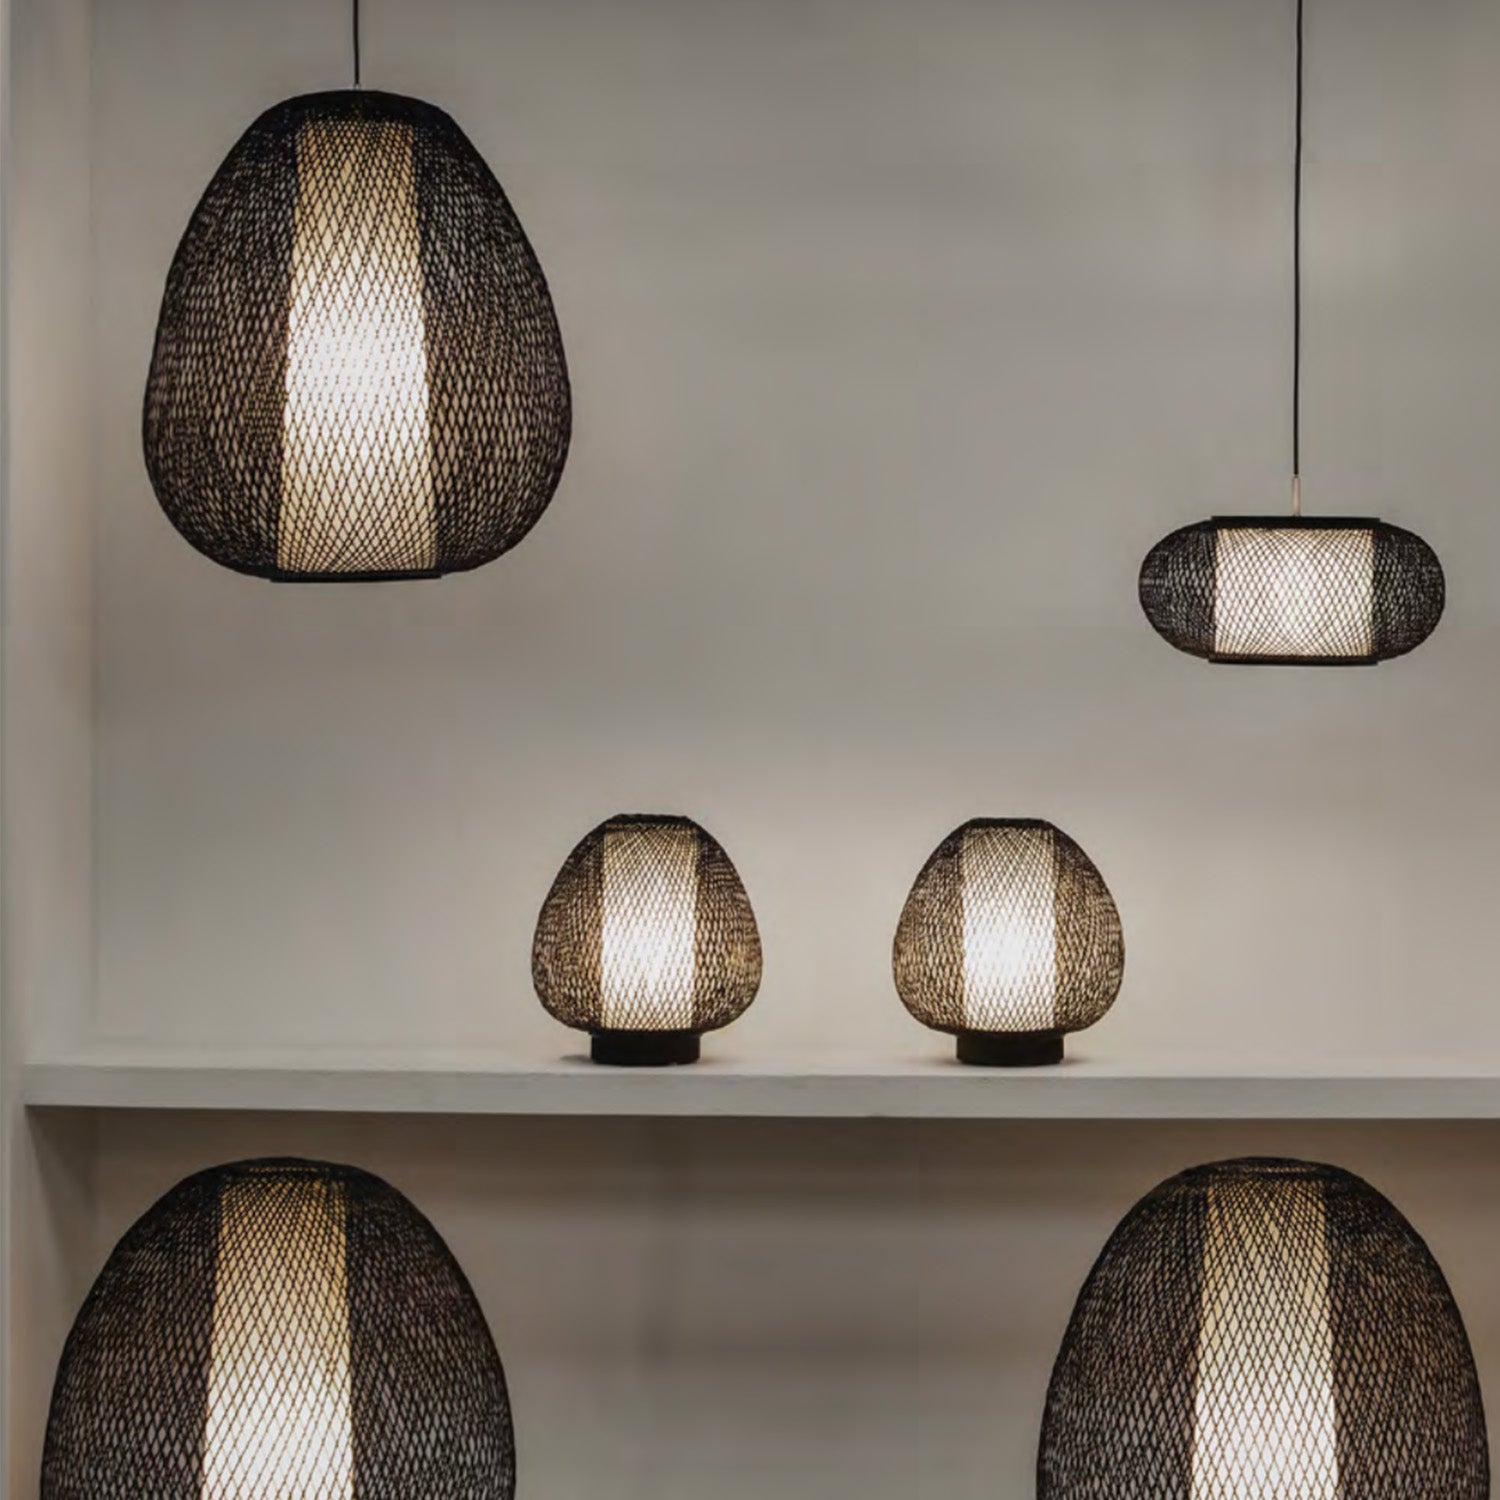 TWIGGY AW - Egg-shaped woven bamboo bedside lamp